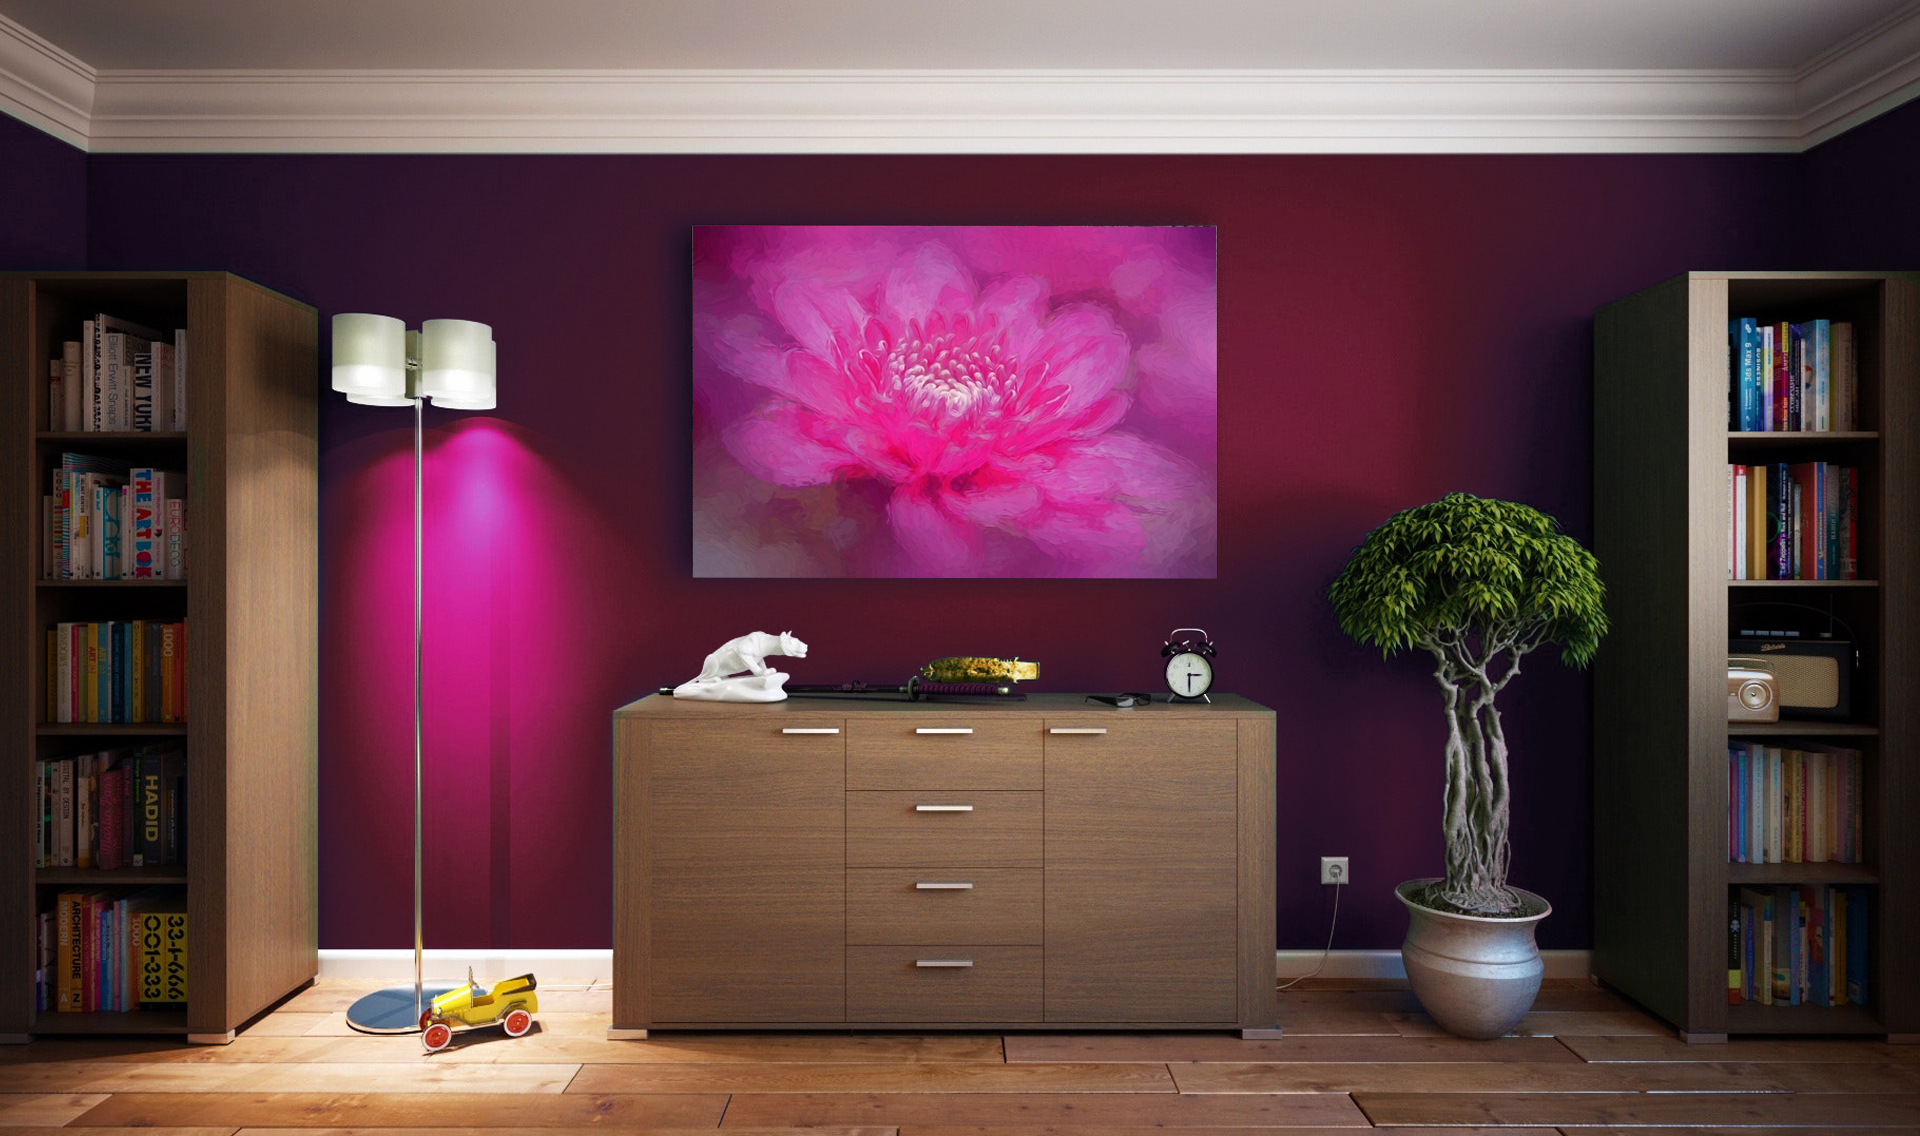 INT. LIVINGROOM BACK WALL PINK – DAY